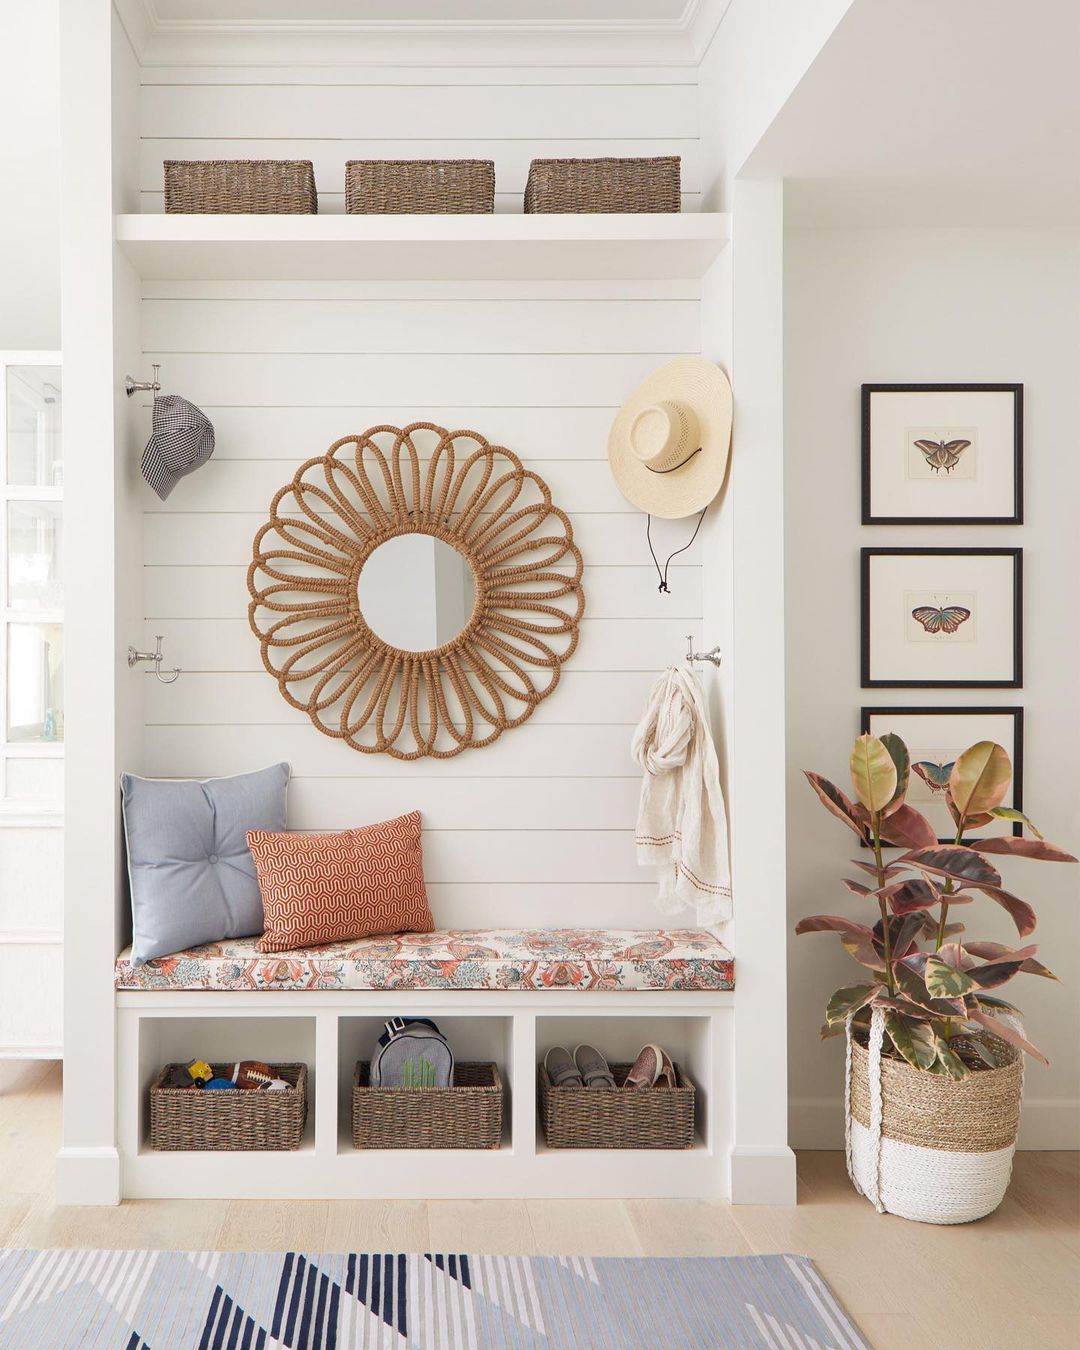 Entryway Nook Bench: How to Style Your Mini Entryway Bench for a Warm Welcome